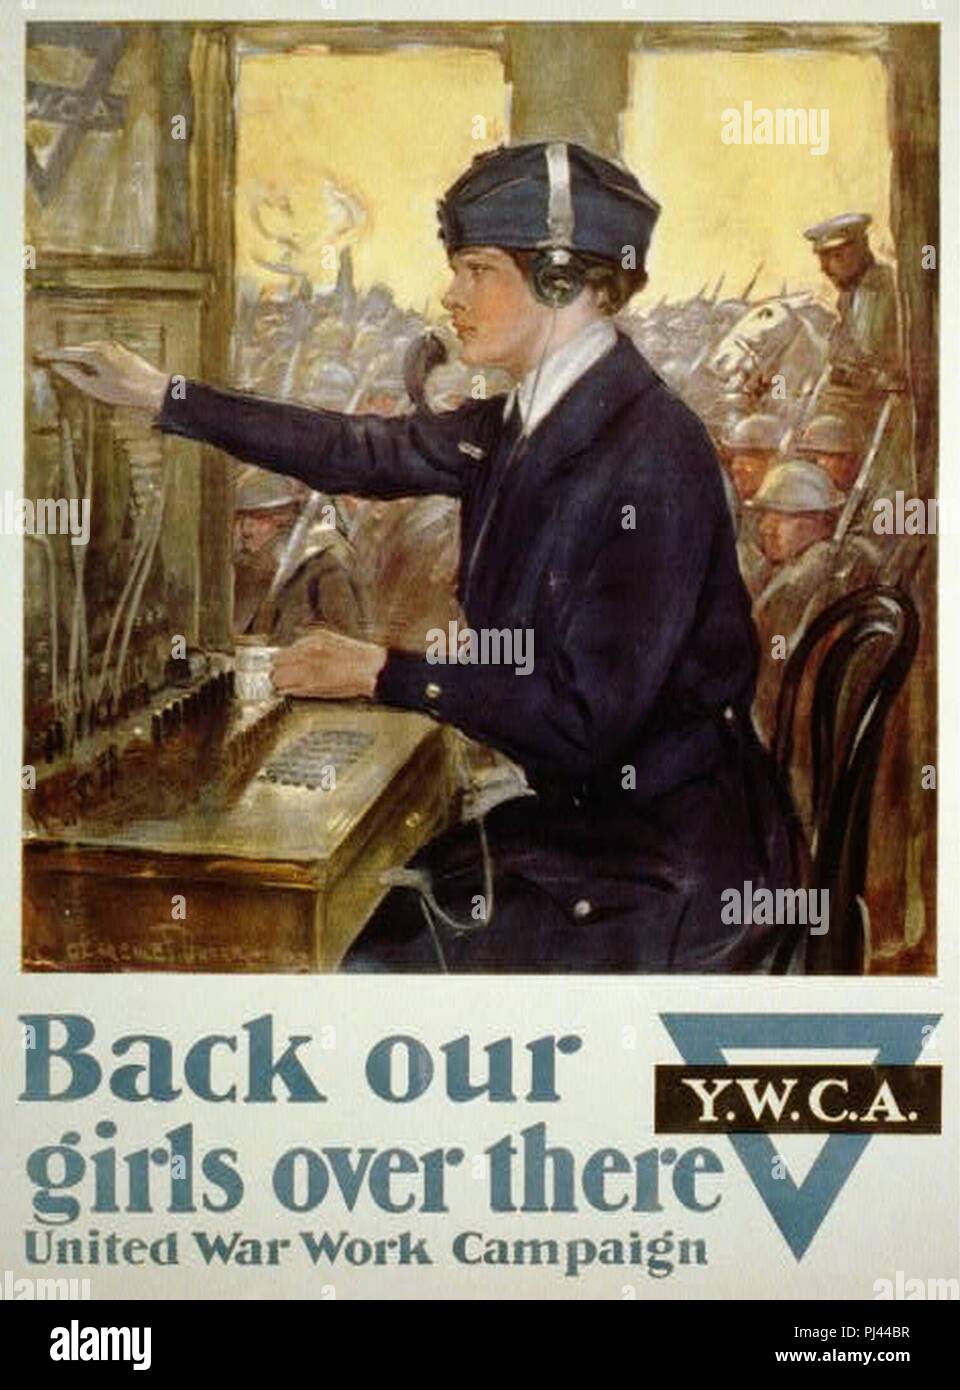 Back our girls over there United War Work Campaign - - Clarence F. Underwood. Stock Photo